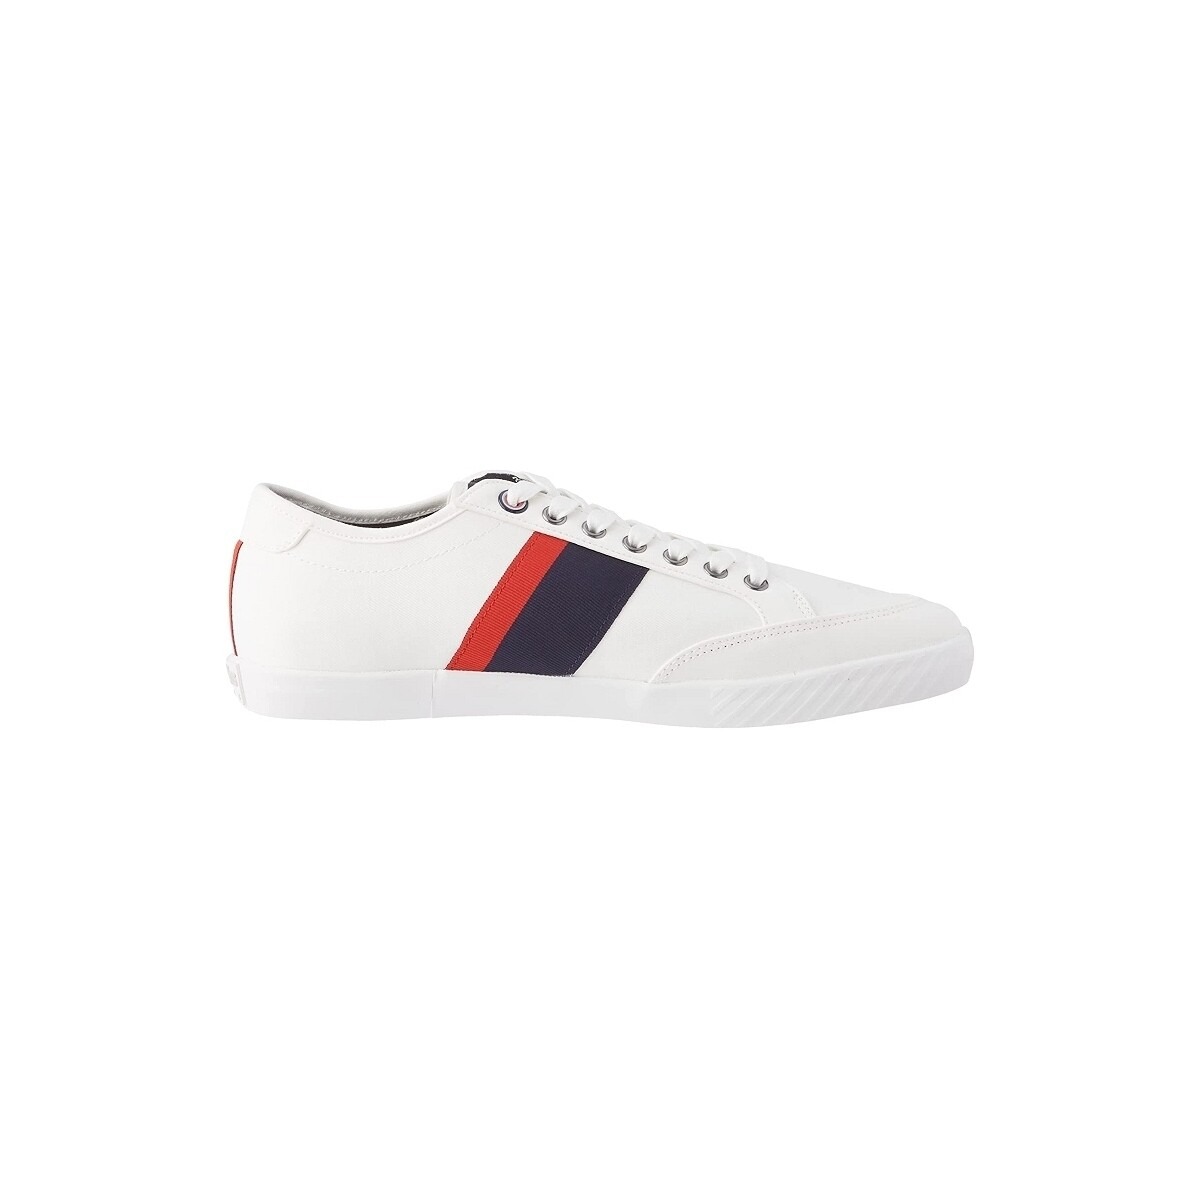 Gents Sneakers White at Spartoo GOOFASH